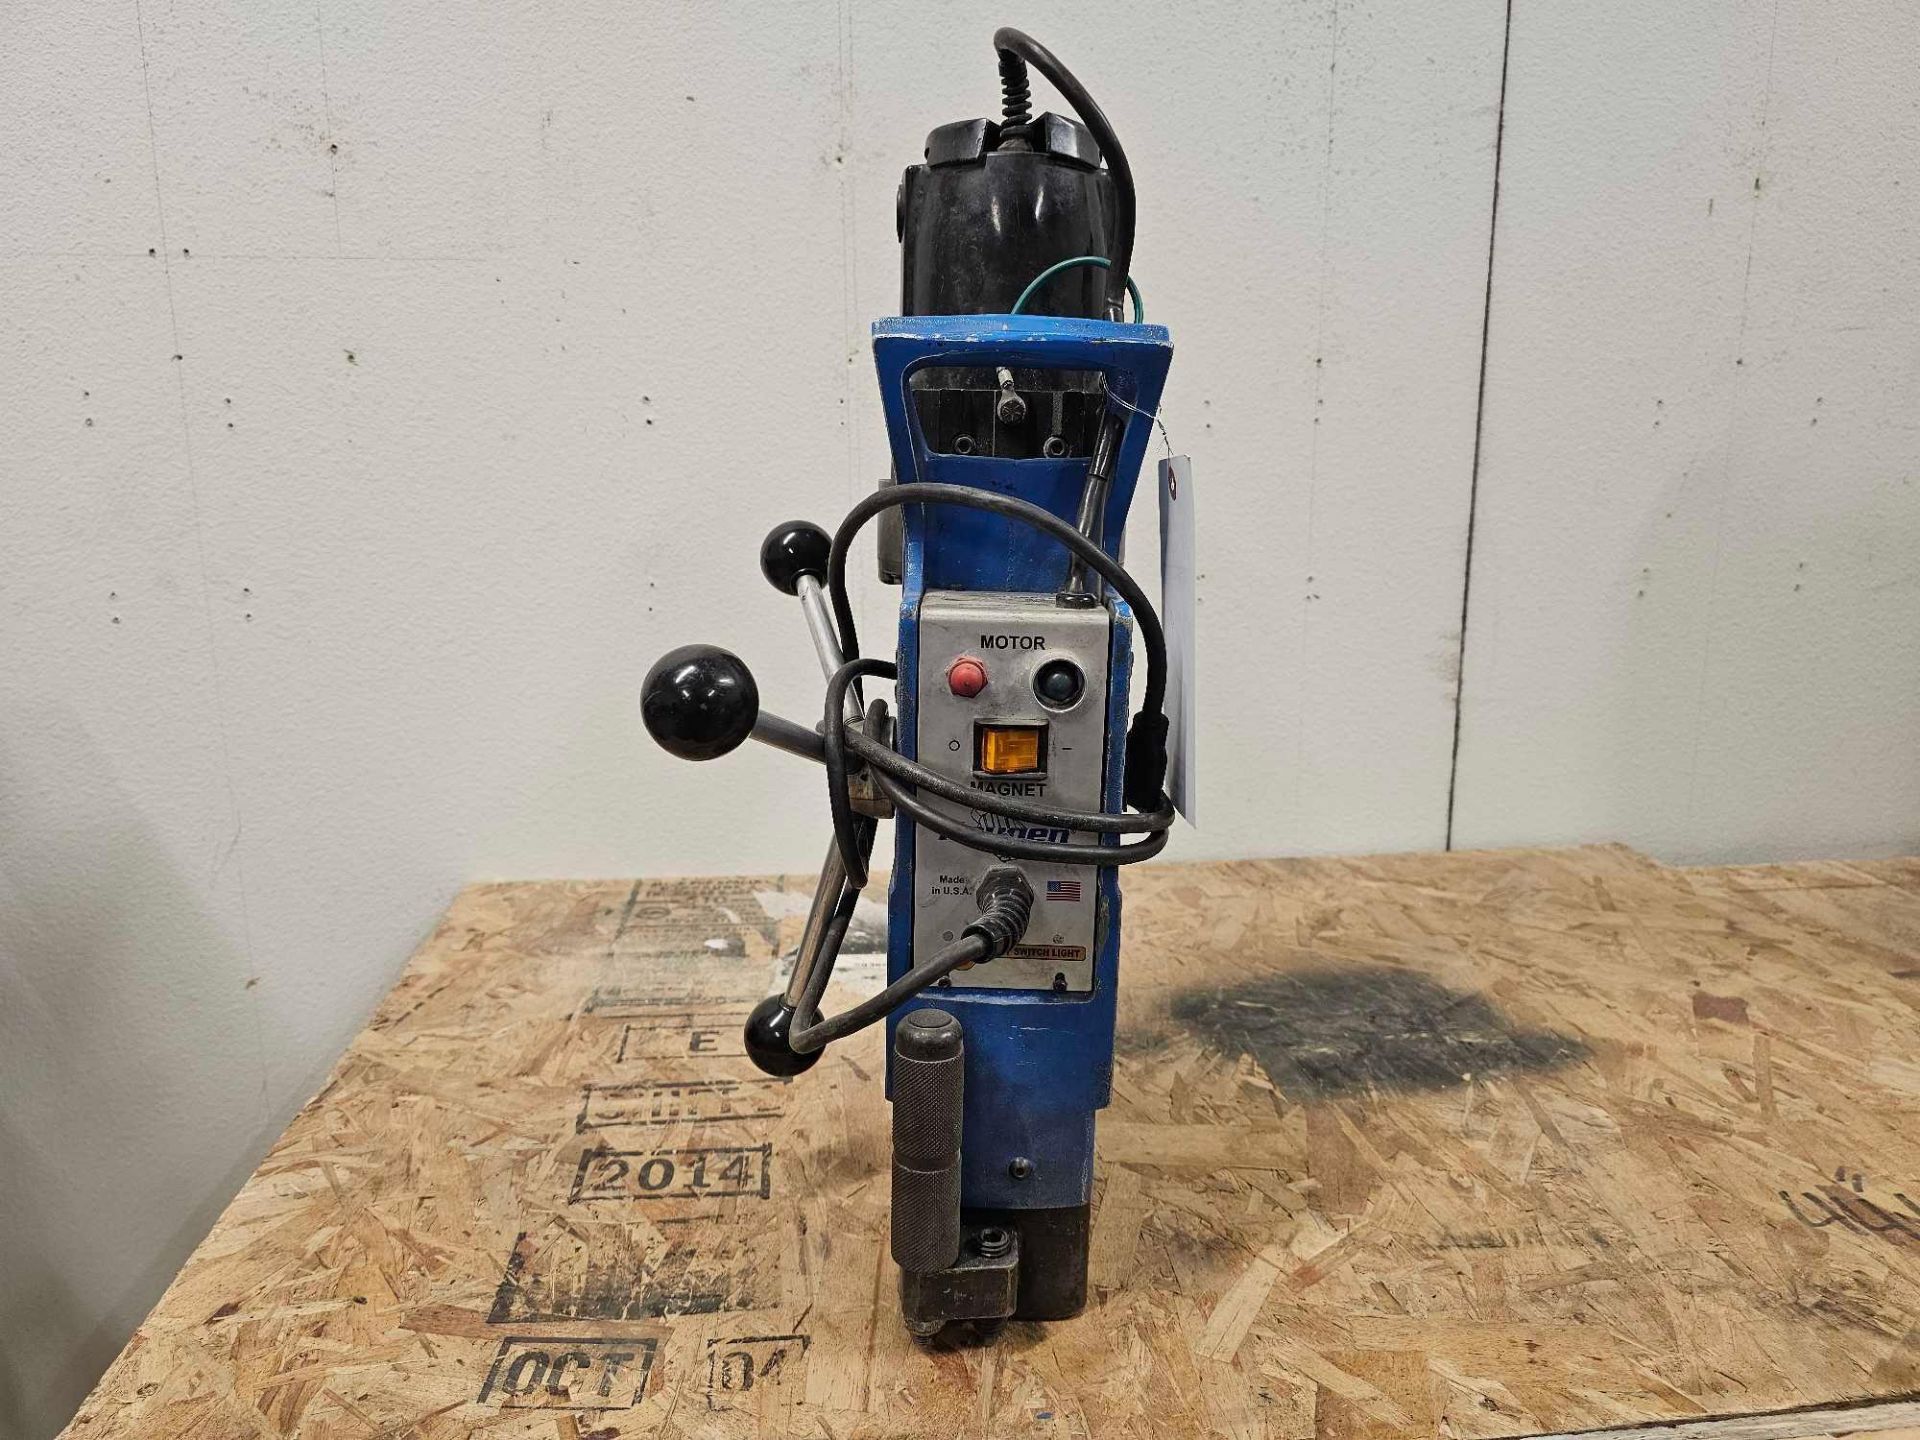 HOUGEN MAG DRILL, MAGNETIC DRILL PRESS - Image 2 of 6